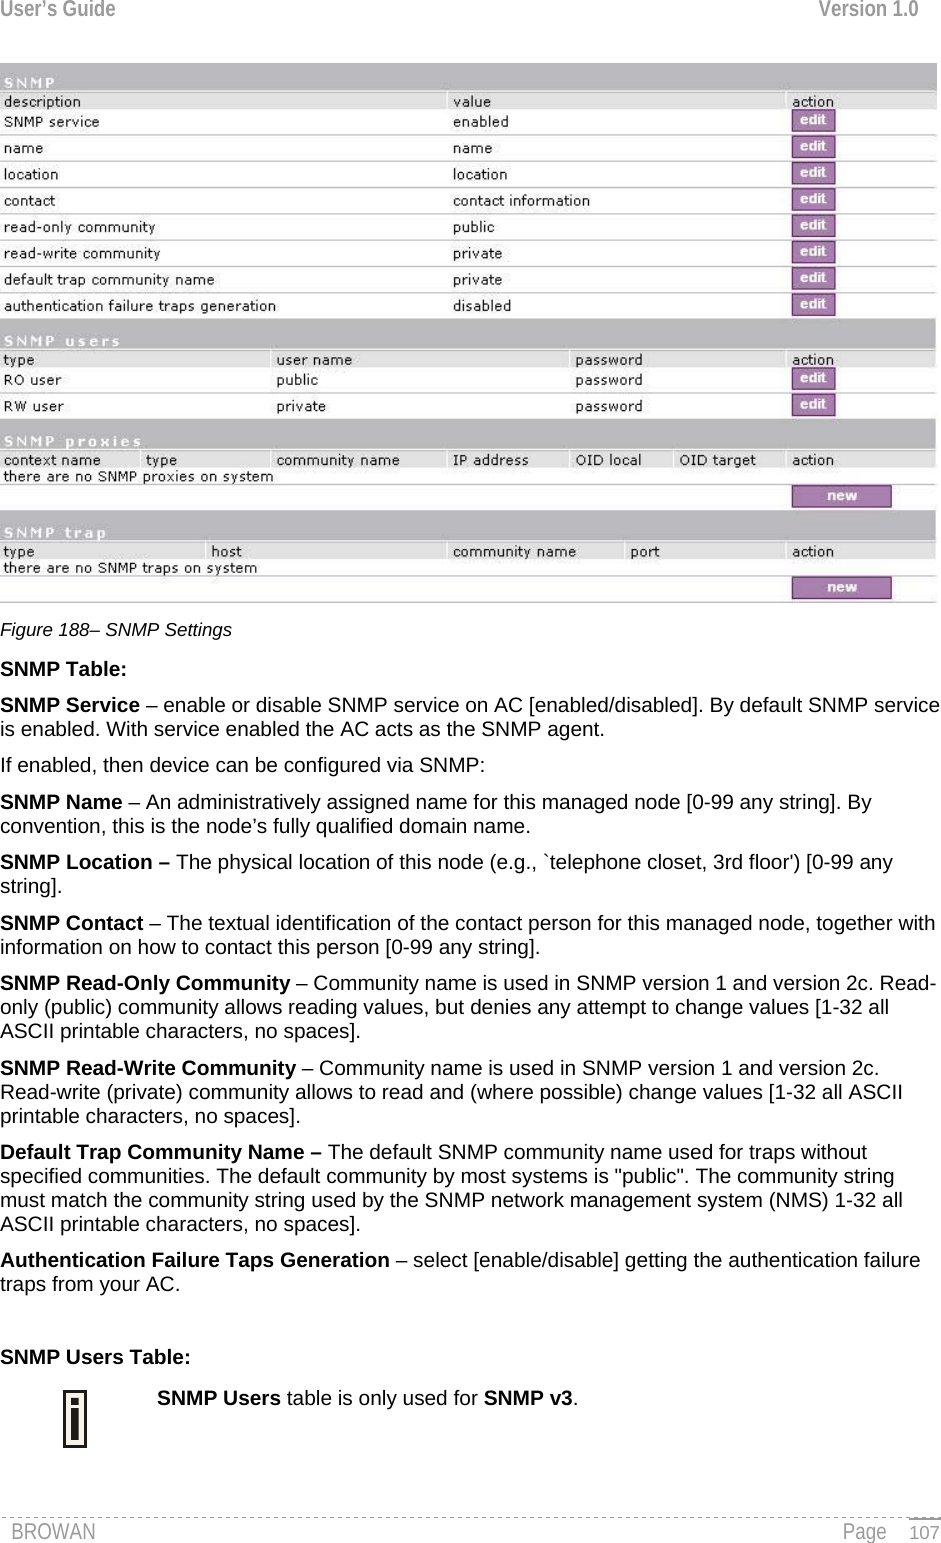 User’s Guide  Version 1.0   Figure 188– SNMP Settings SNMP Table: SNMP Service – enable or disable SNMP service on AC [enabled/disabled]. By default SNMP service is enabled. With service enabled the AC acts as the SNMP agent. If enabled, then device can be configured via SNMP: SNMP Name – An administratively assigned name for this managed node [0-99 any string]. By convention, this is the node’s fully qualified domain name. SNMP Location – The physical location of this node (e.g., `telephone closet, 3rd floor&apos;) [0-99 any string].  SNMP Contact – The textual identification of the contact person for this managed node, together with information on how to contact this person [0-99 any string]. SNMP Read-Only Community – Community name is used in SNMP version 1 and version 2c. Read-only (public) community allows reading values, but denies any attempt to change values [1-32 all ASCII printable characters, no spaces]. SNMP Read-Write Community – Community name is used in SNMP version 1 and version 2c. Read-write (private) community allows to read and (where possible) change values [1-32 all ASCII printable characters, no spaces]. Default Trap Community Name – The default SNMP community name used for traps without specified communities. The default community by most systems is &quot;public&quot;. The community string must match the community string used by the SNMP network management system (NMS) 1-32 all ASCII printable characters, no spaces]. Authentication Failure Taps Generation – select [enable/disable] getting the authentication failure traps from your AC.  SNMP Users Table: SNMP Users table is only used for SNMP v3.  BROWAN                                                                                                                                               Page   107